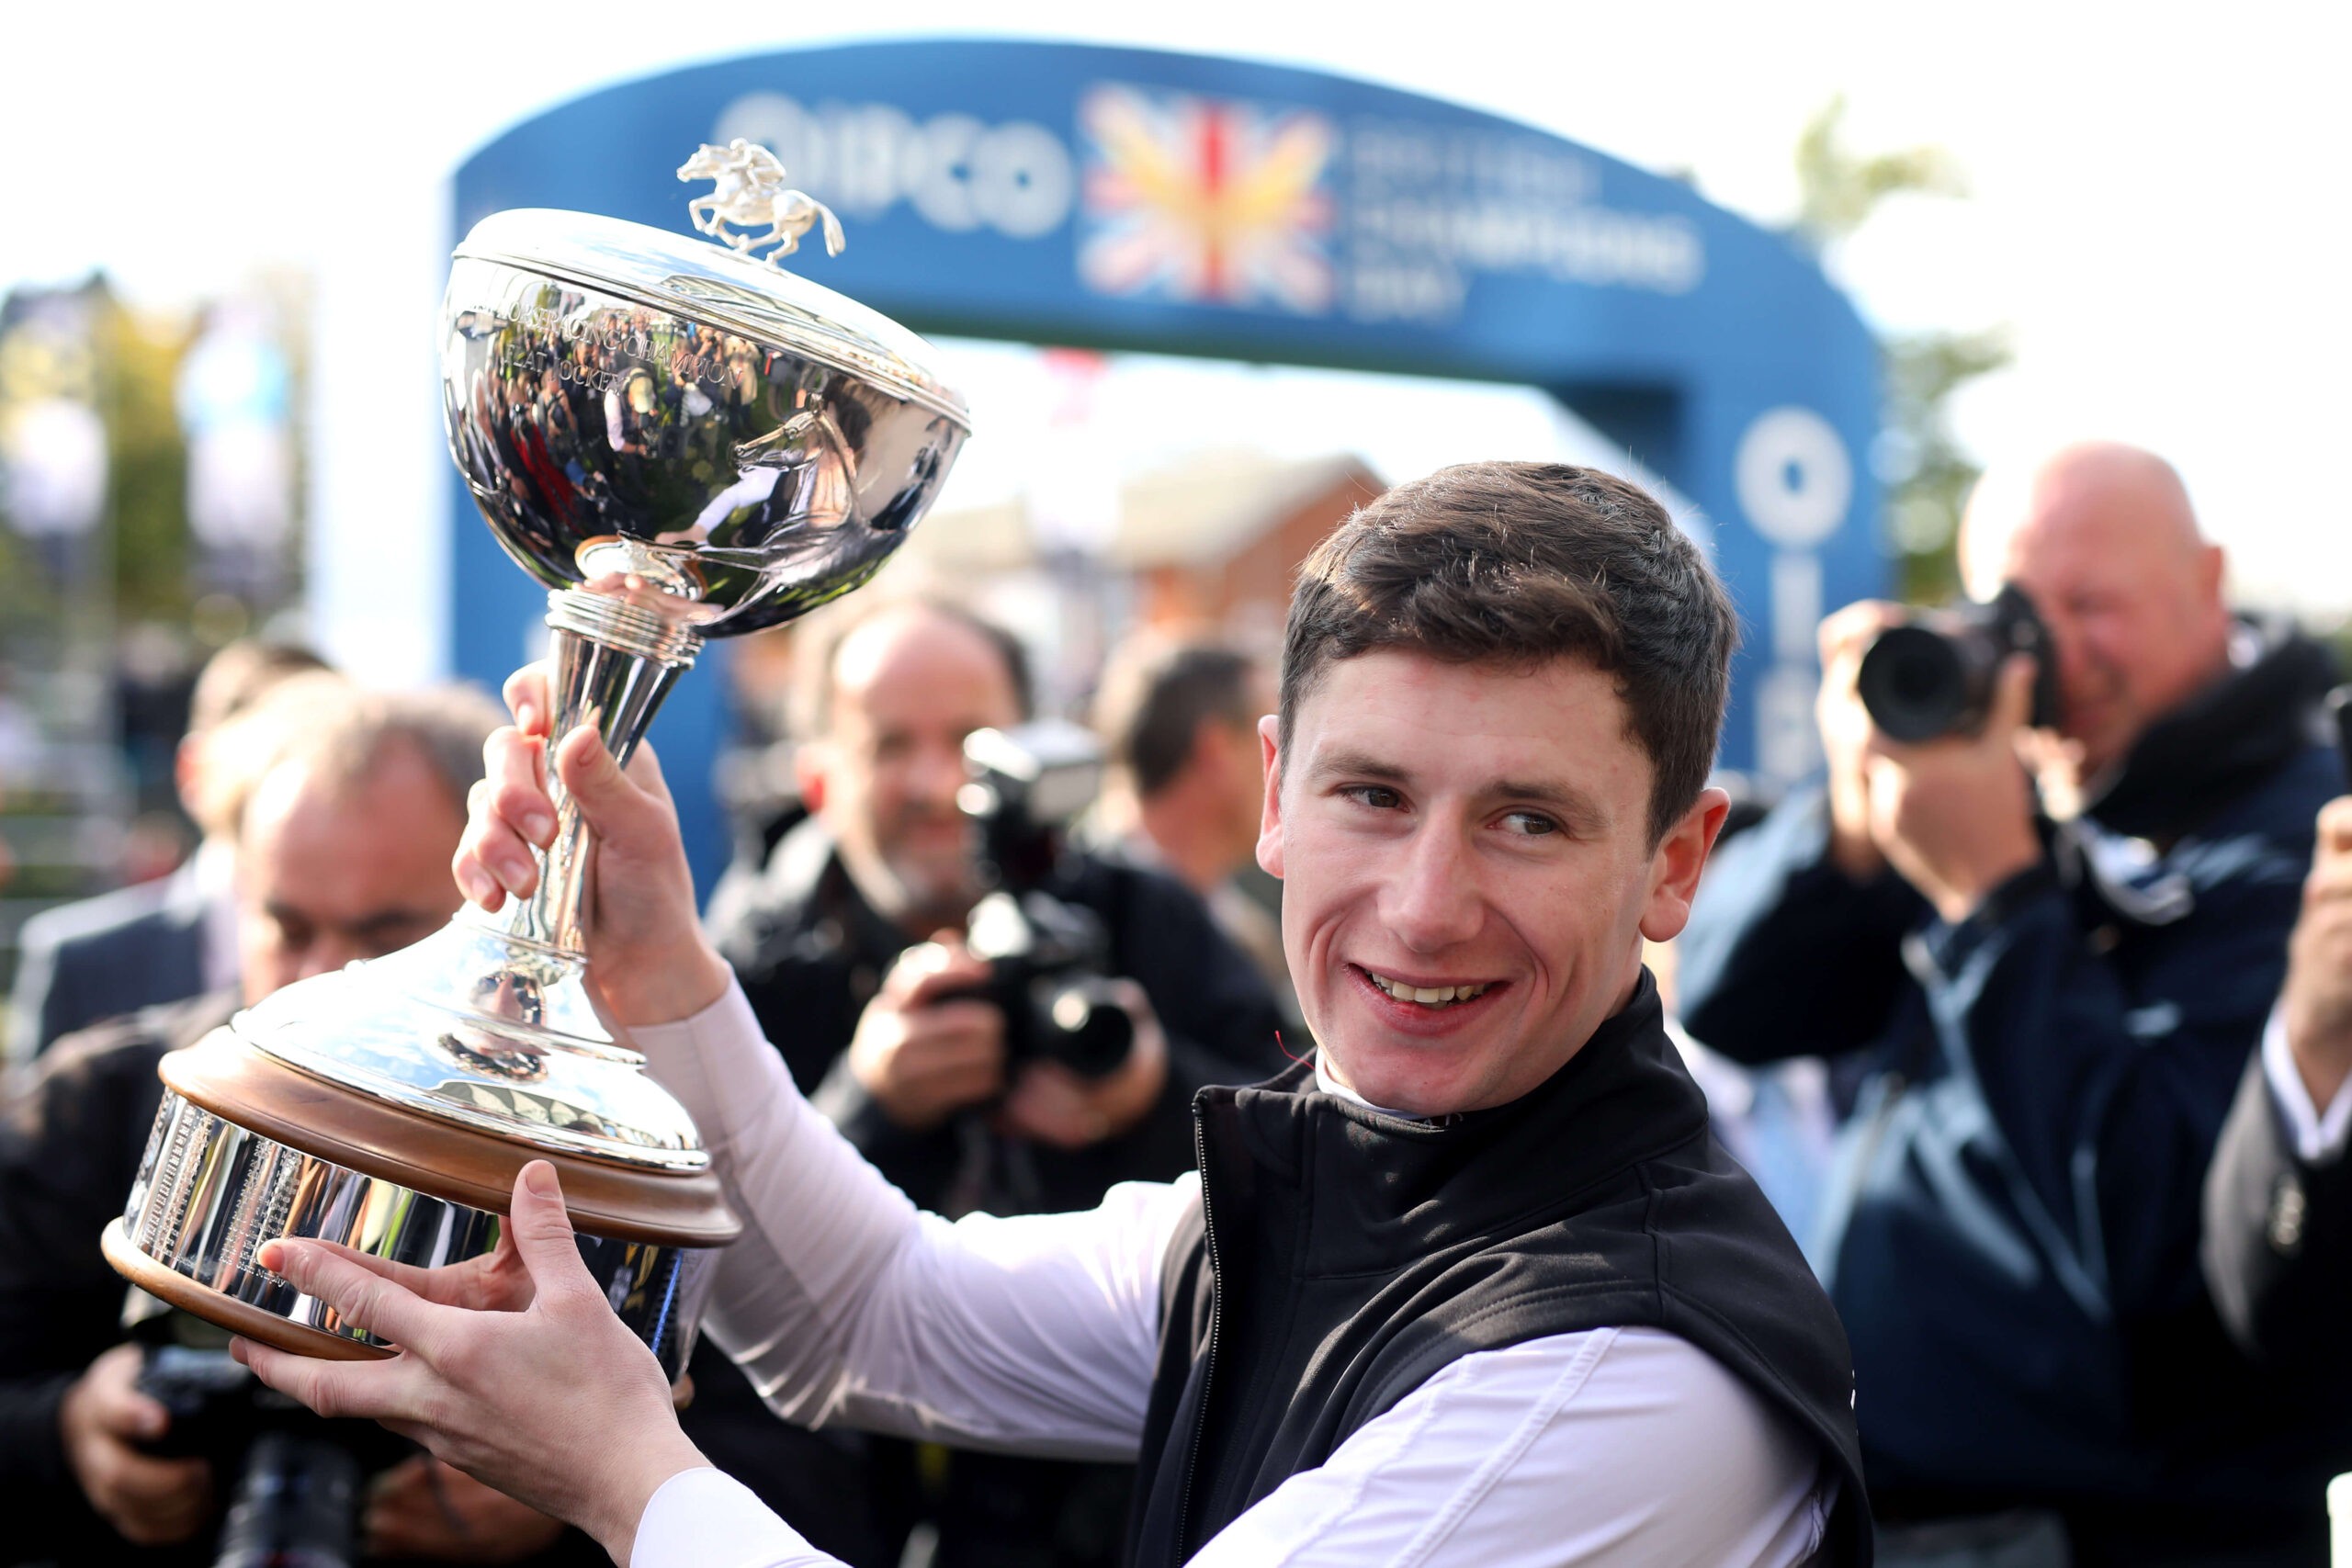 Oisin Murphy is ready for a return to racing.